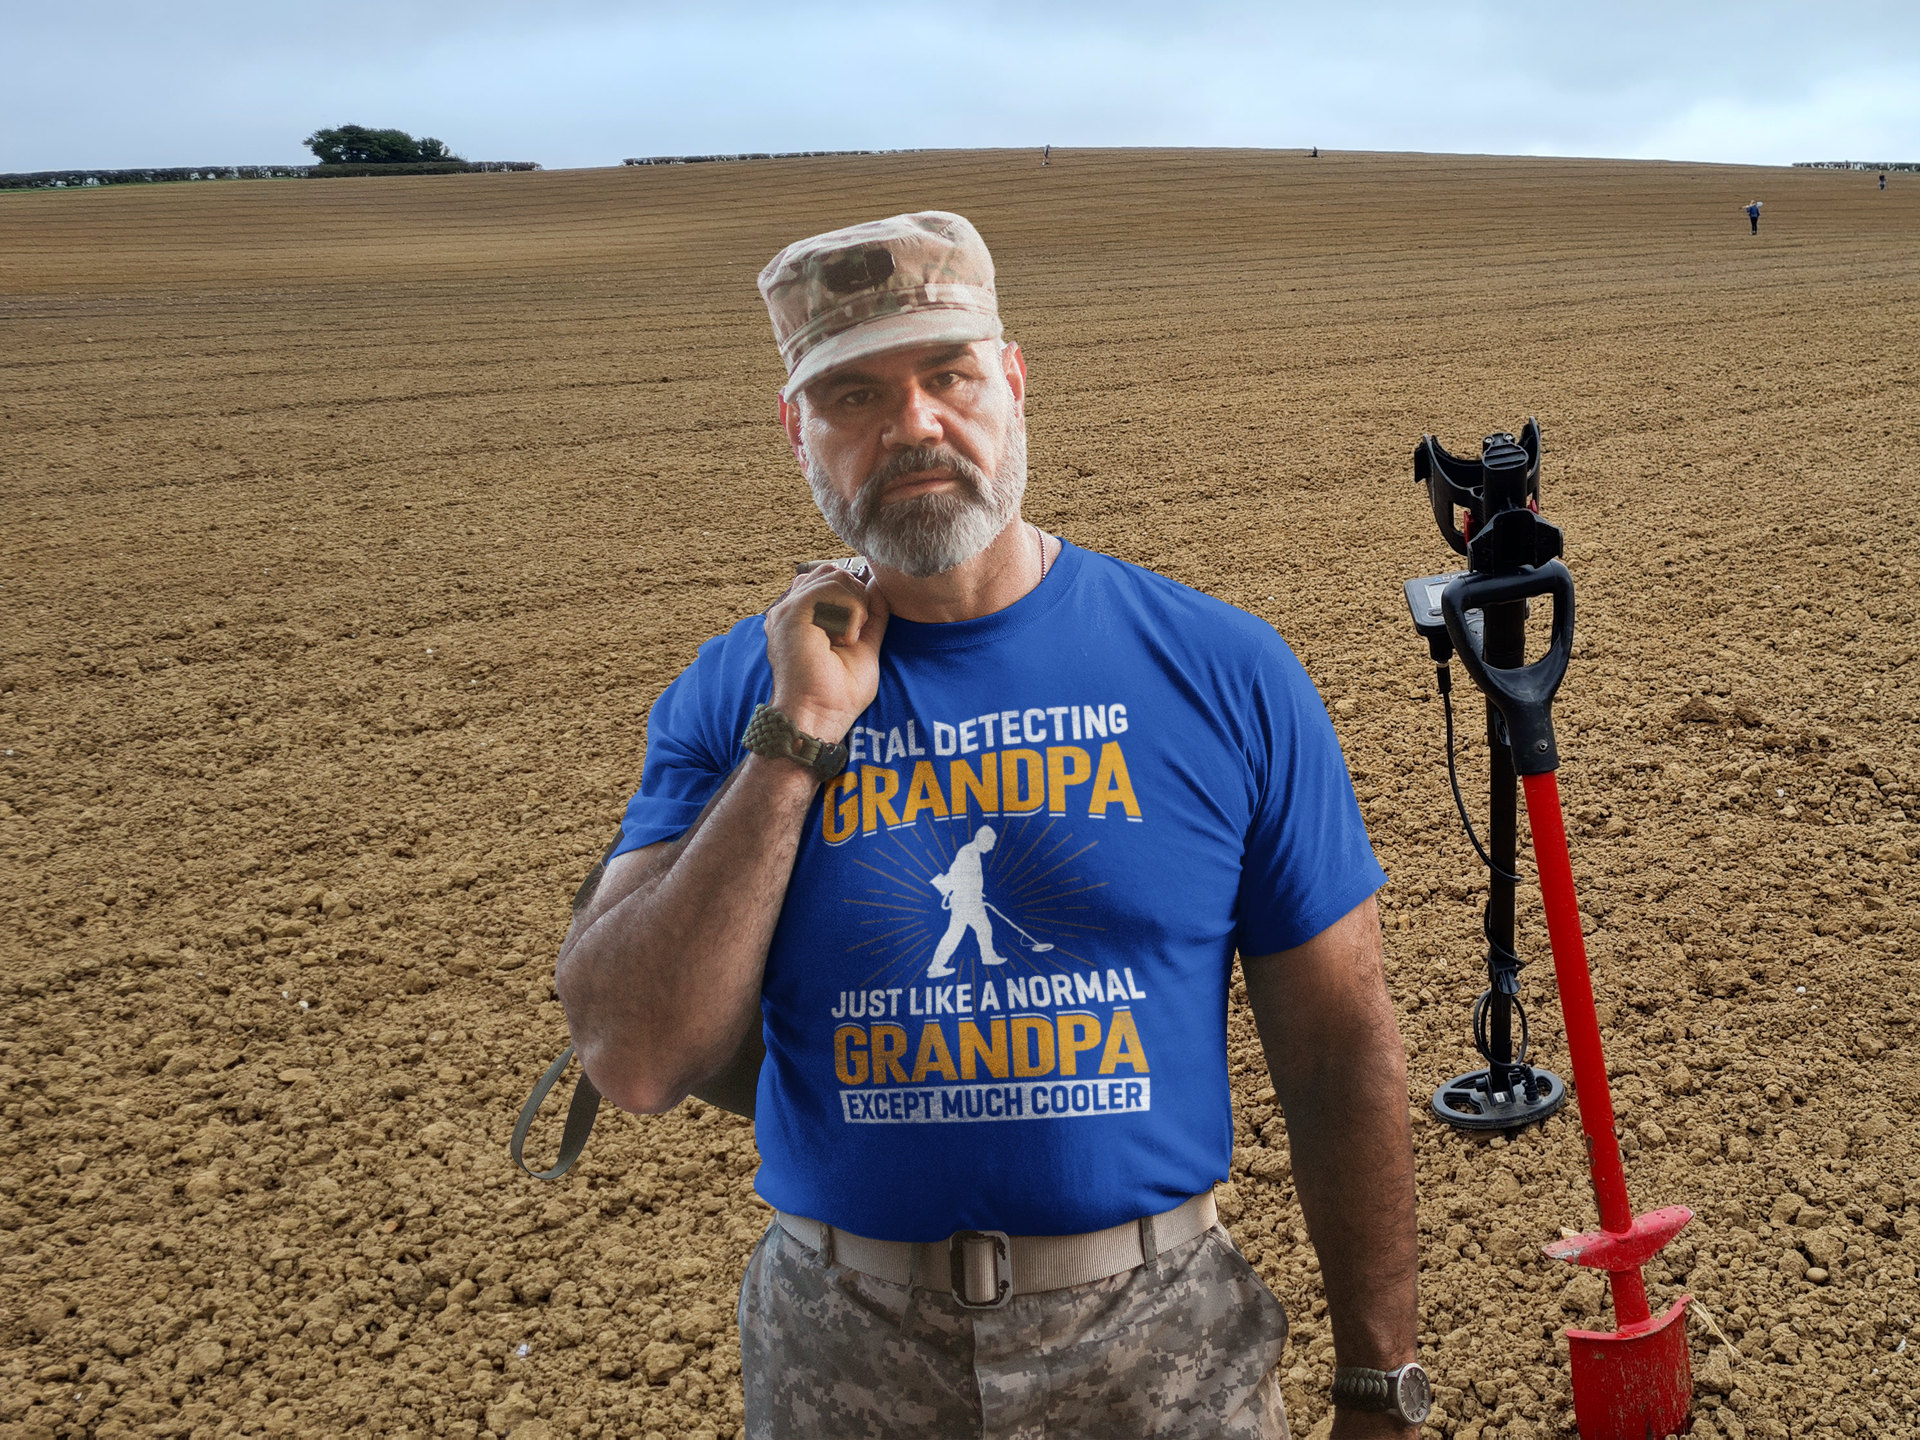 Metal Detecting Grandpa, Just Like A Normal Grandpa Except Much Cooler